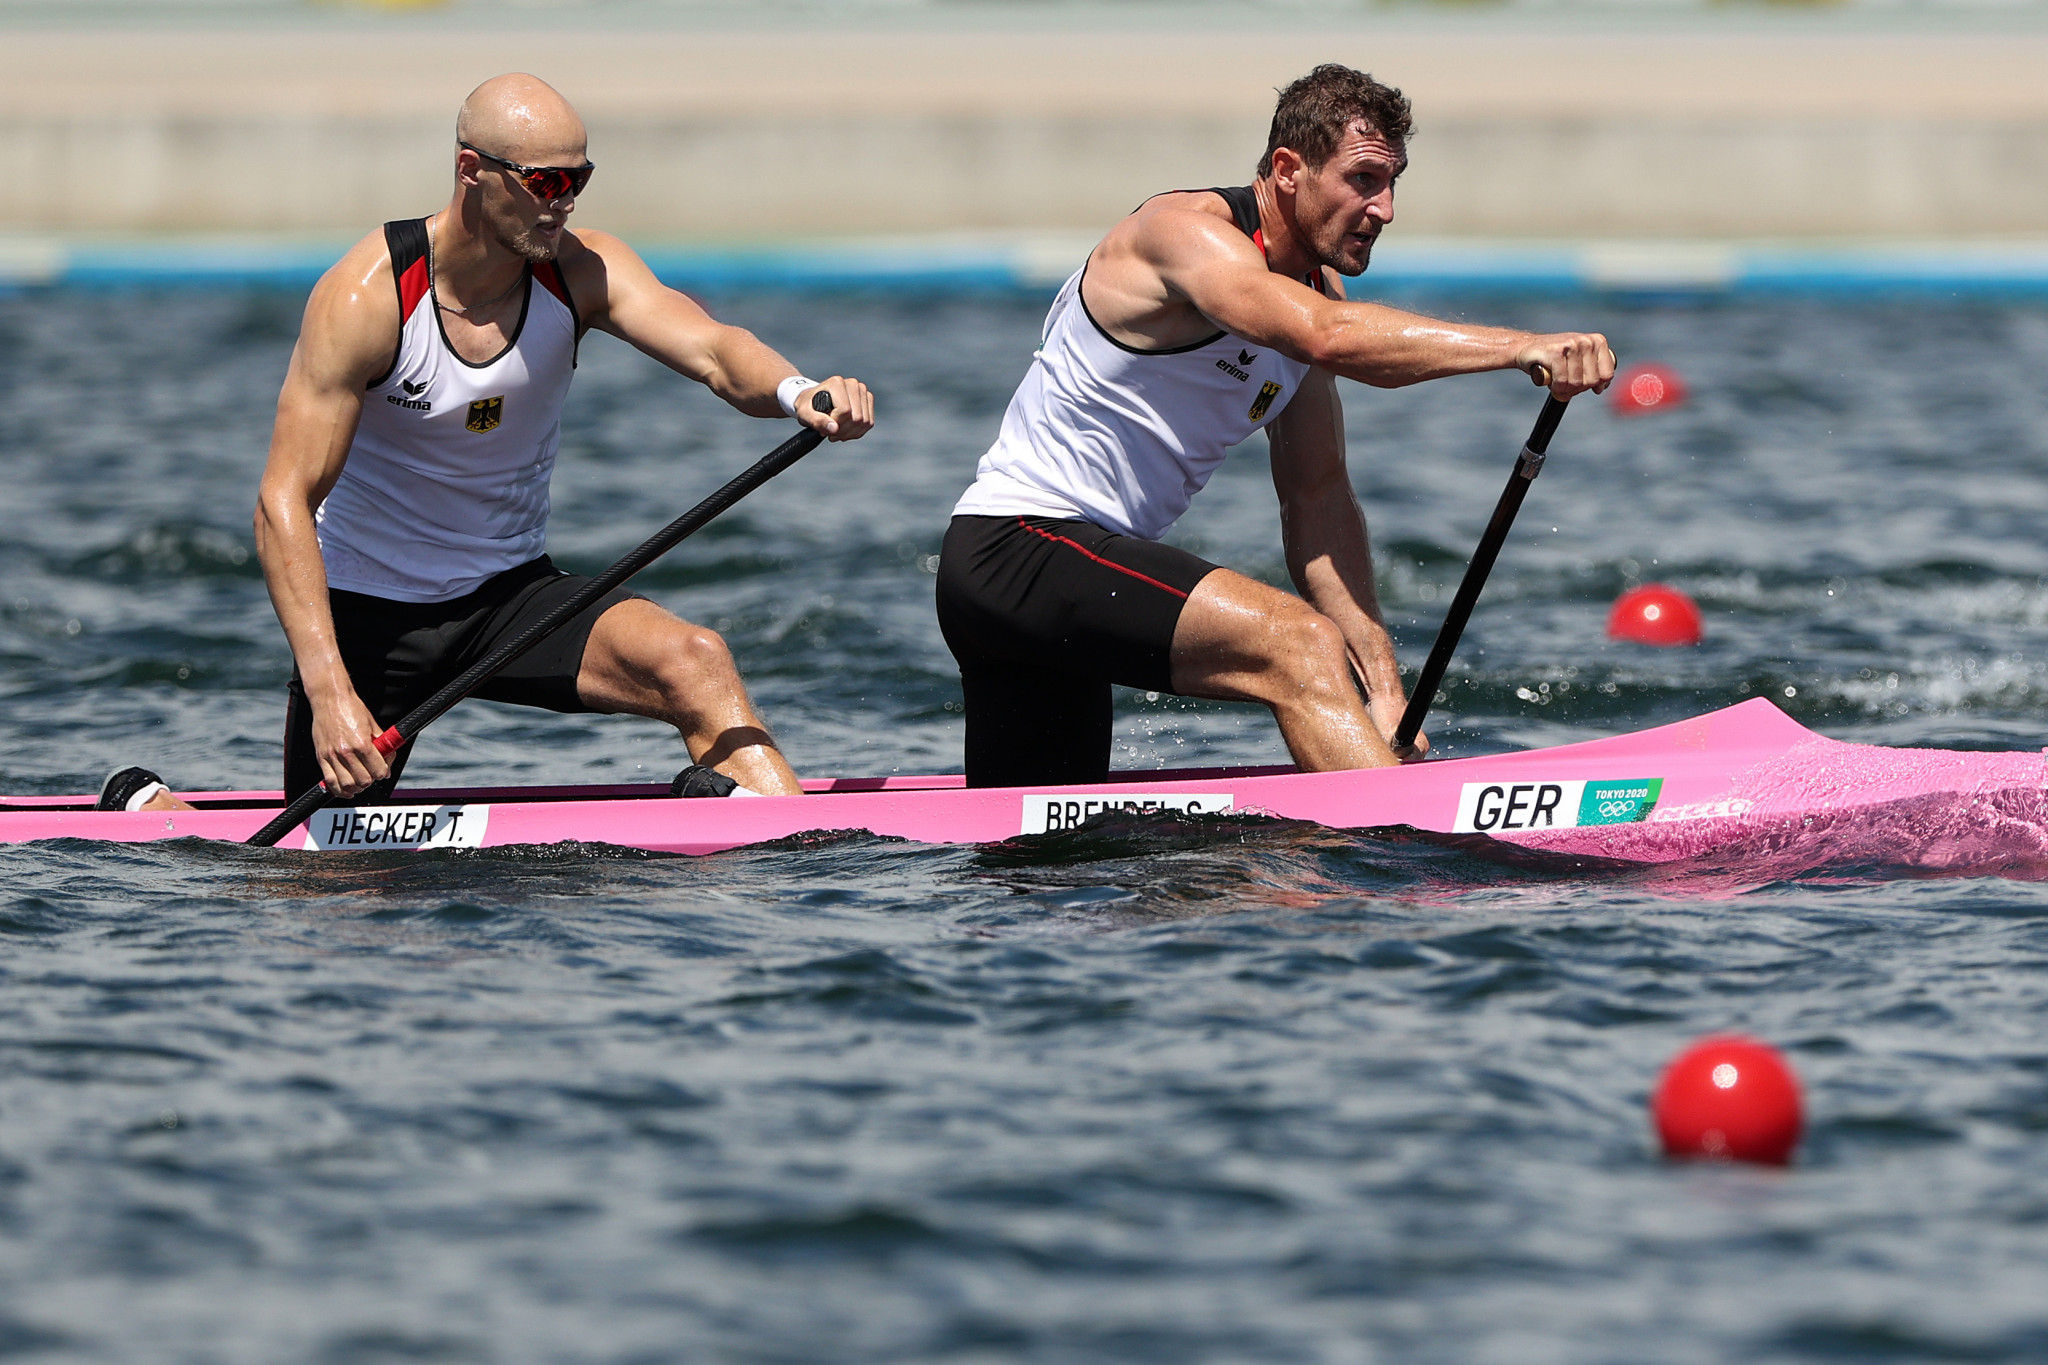 Germany's Sebastian Brendel, right, and Tim Hecker, left, took bronze in the men's C2 1,000m at the Tokyo 2020 Olympics ©Getty Images